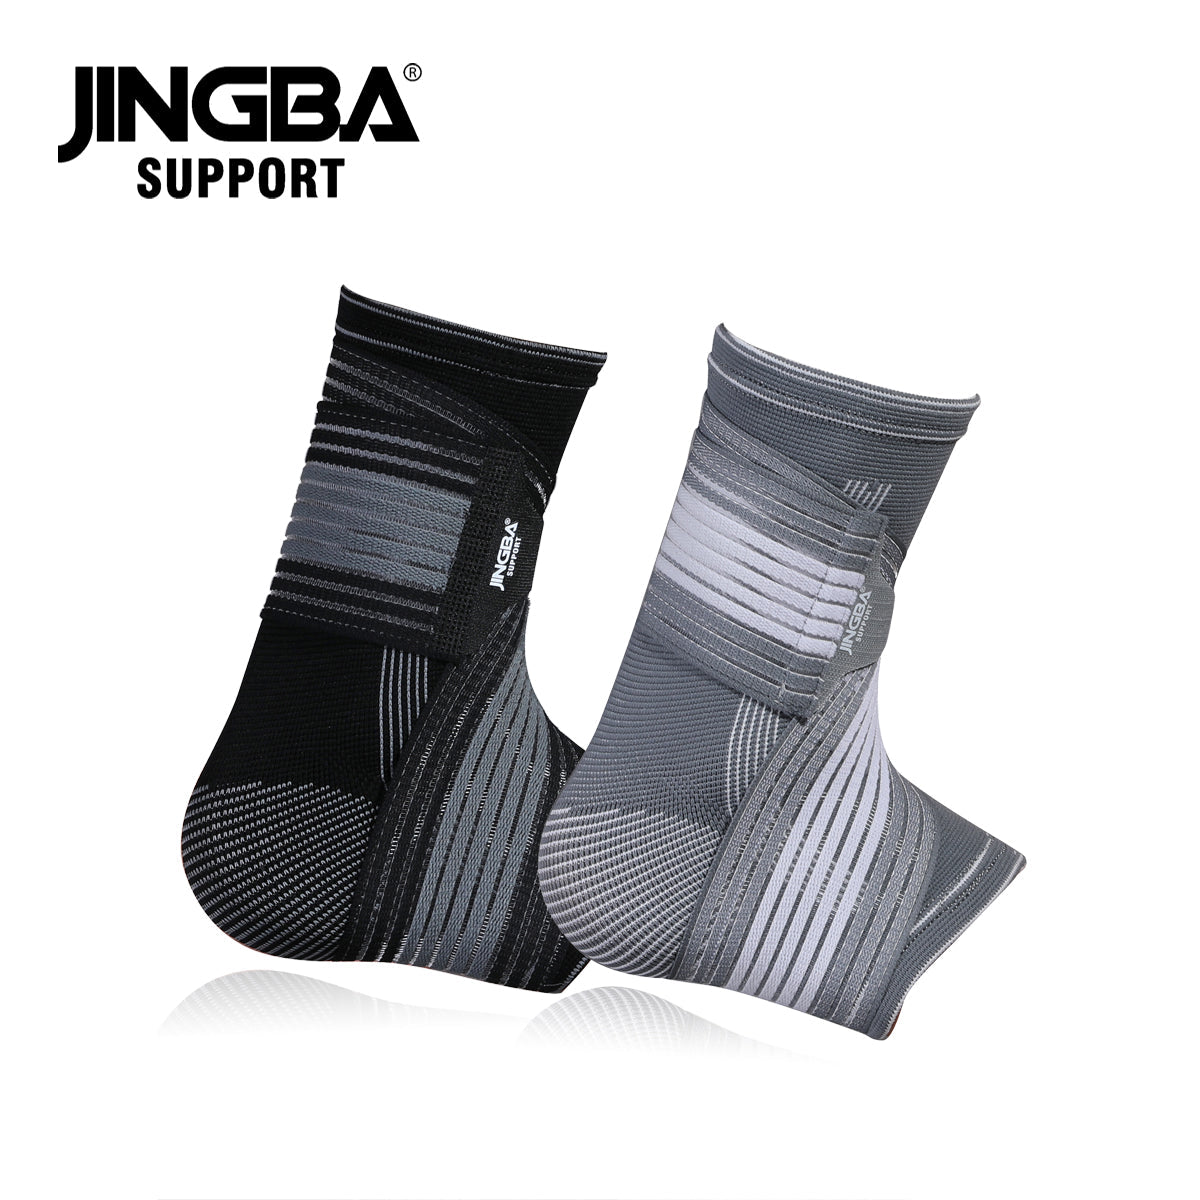 Jingba Ankle Support | JINGBA&nbsp;ANKLE SUPPORT&nbsp;applies even pressure support across your ankle joint, which provides ultimate pain relief&nbsp;for plantar fasciitis, arthritis, sprains, swelling, tendonitis, muscle fatigue, and other ankle pain. With our ankle supports, you’ll be able to tackle any activity and enhance your performance&nbsp;and minimise injuries.